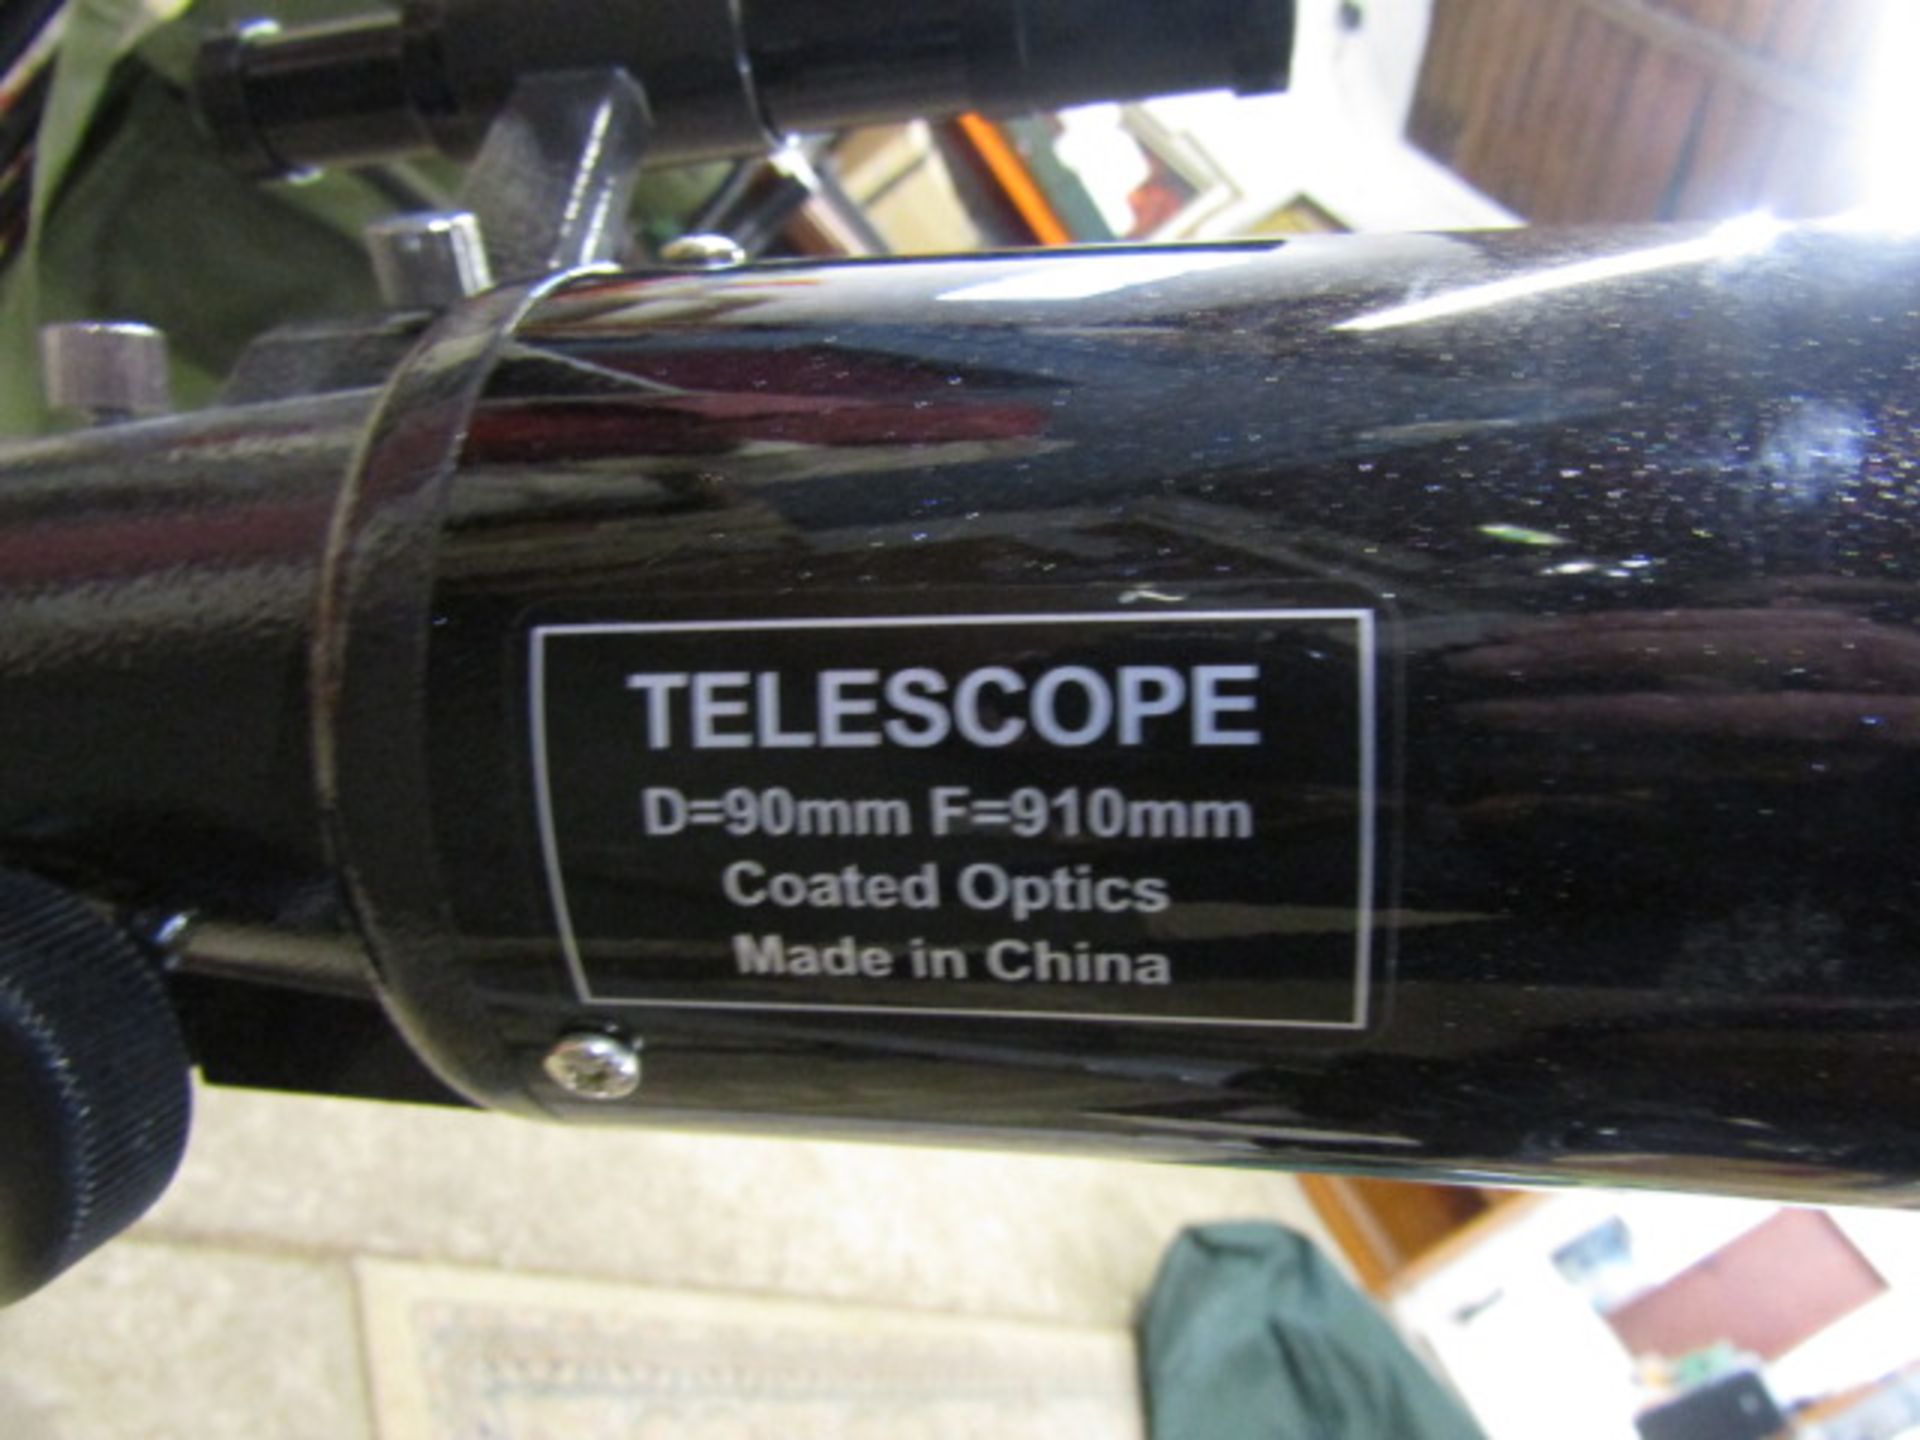 New and unused Sky Walker telescope with stand, box of lenses, book and a canvas cover - Image 4 of 5